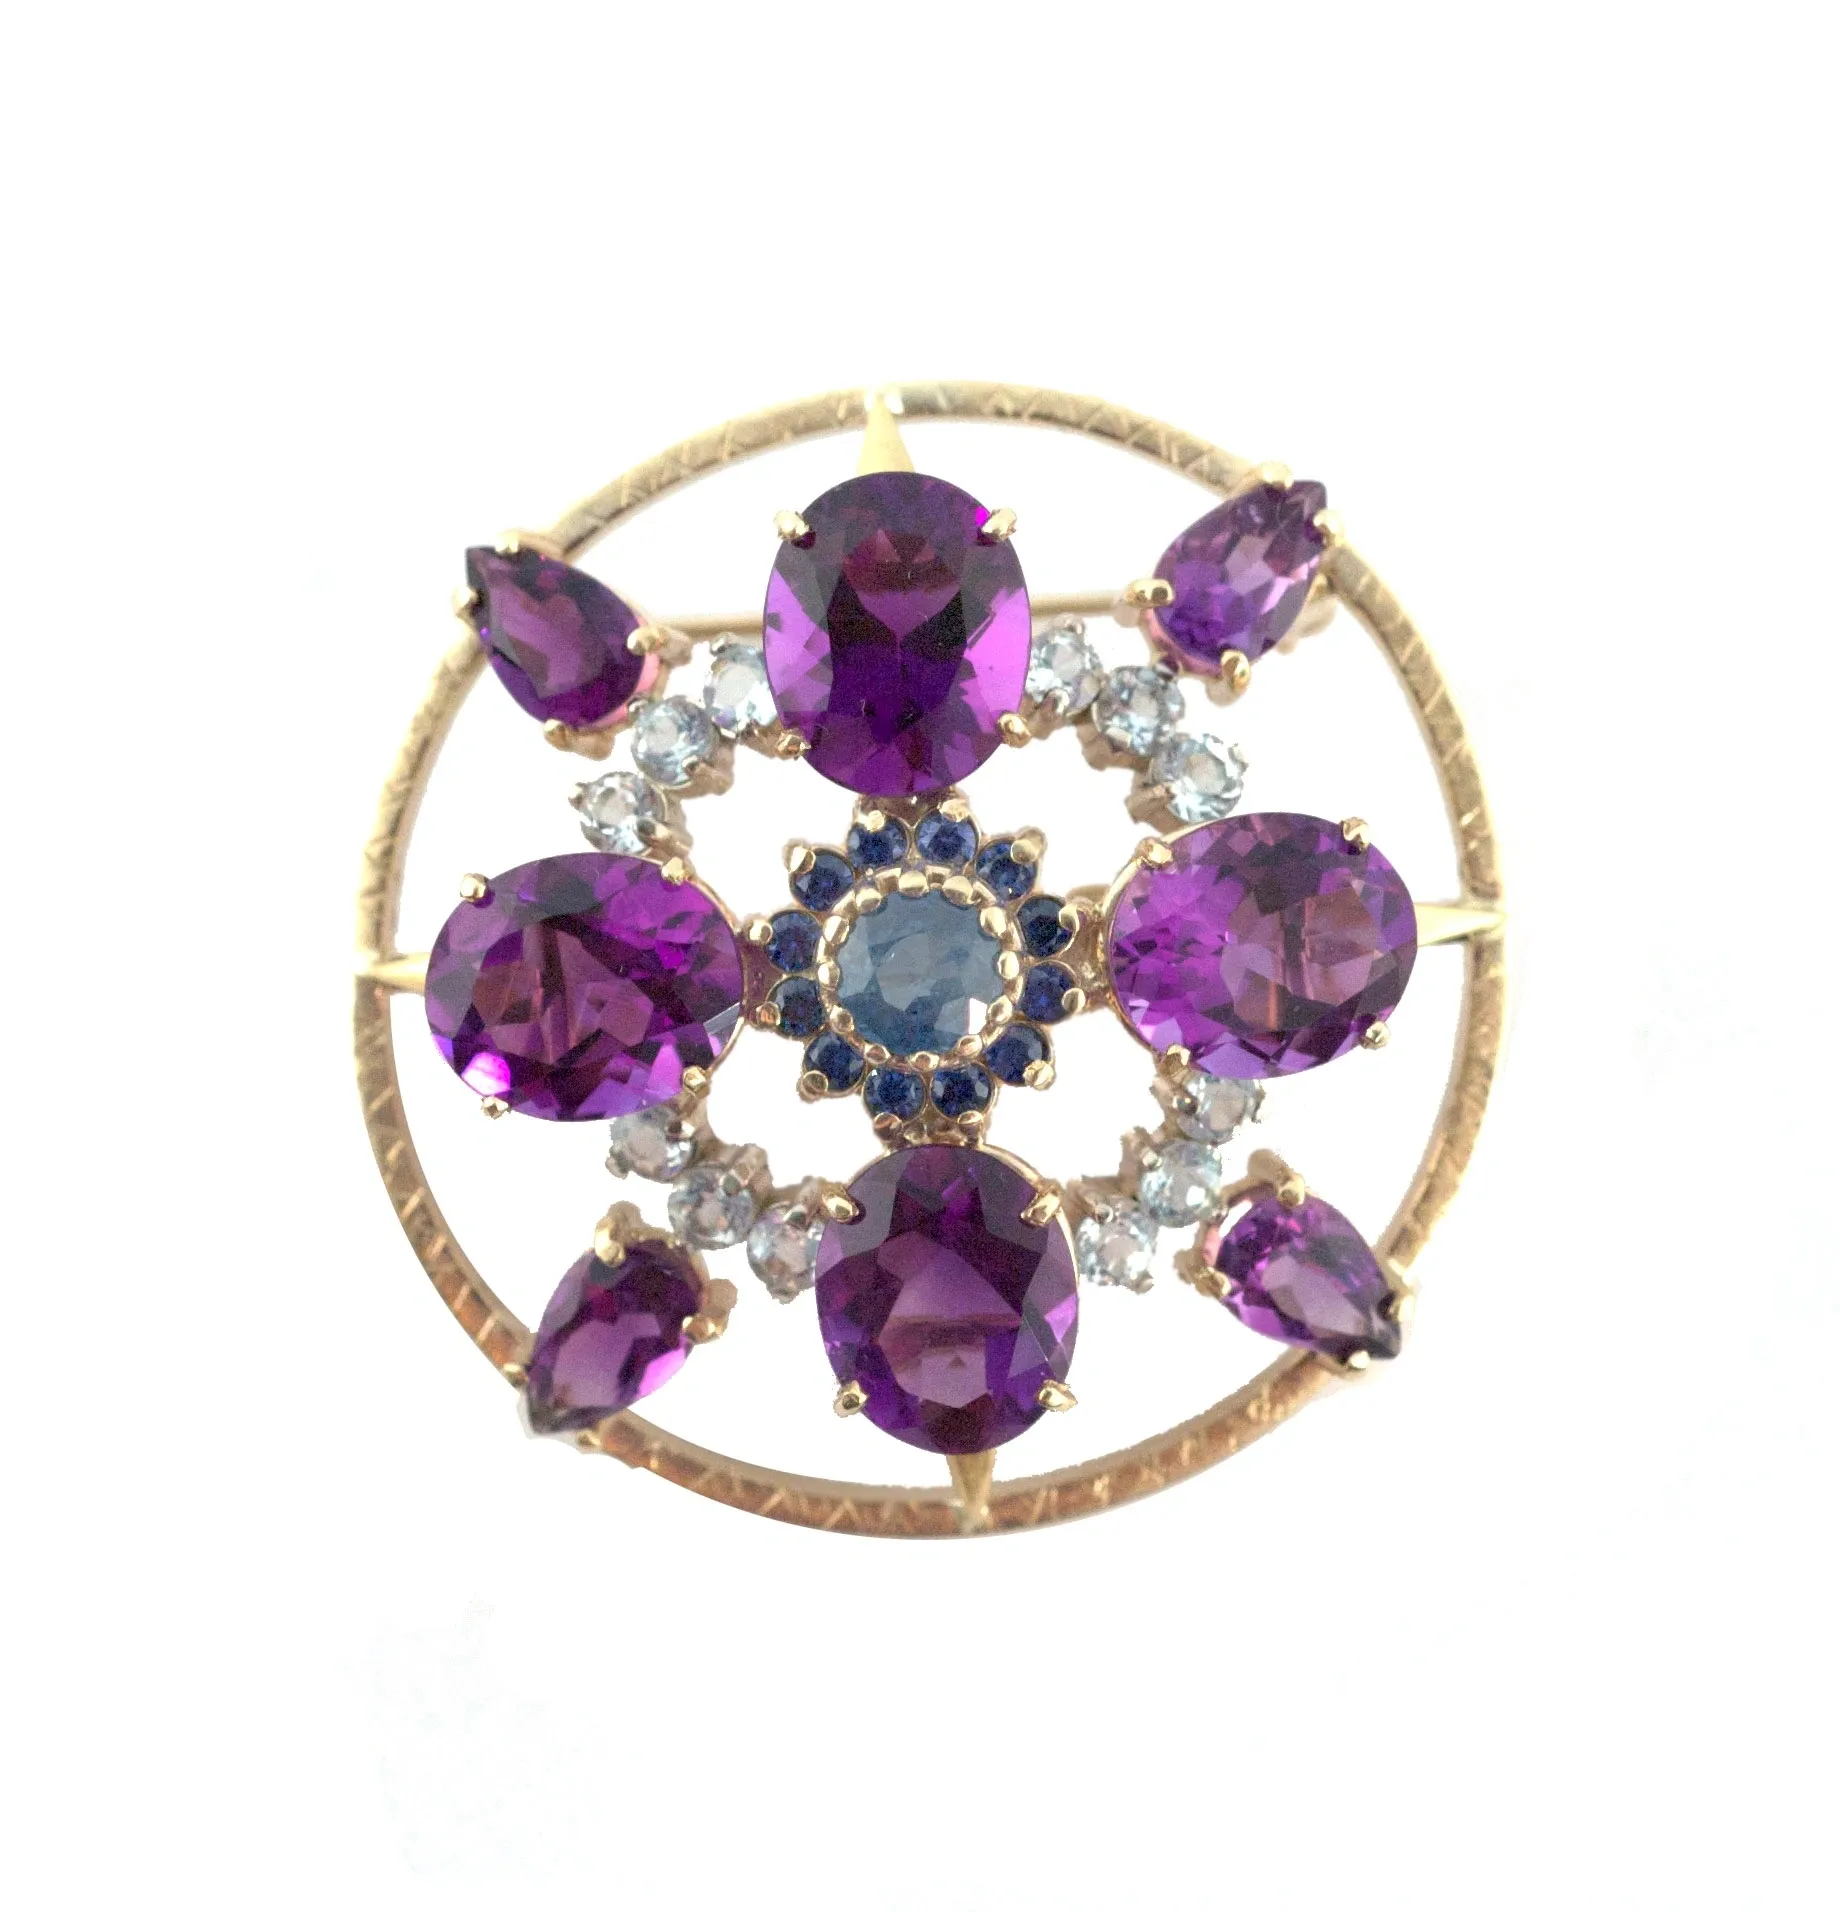 A gold circle with purple and blue stones.